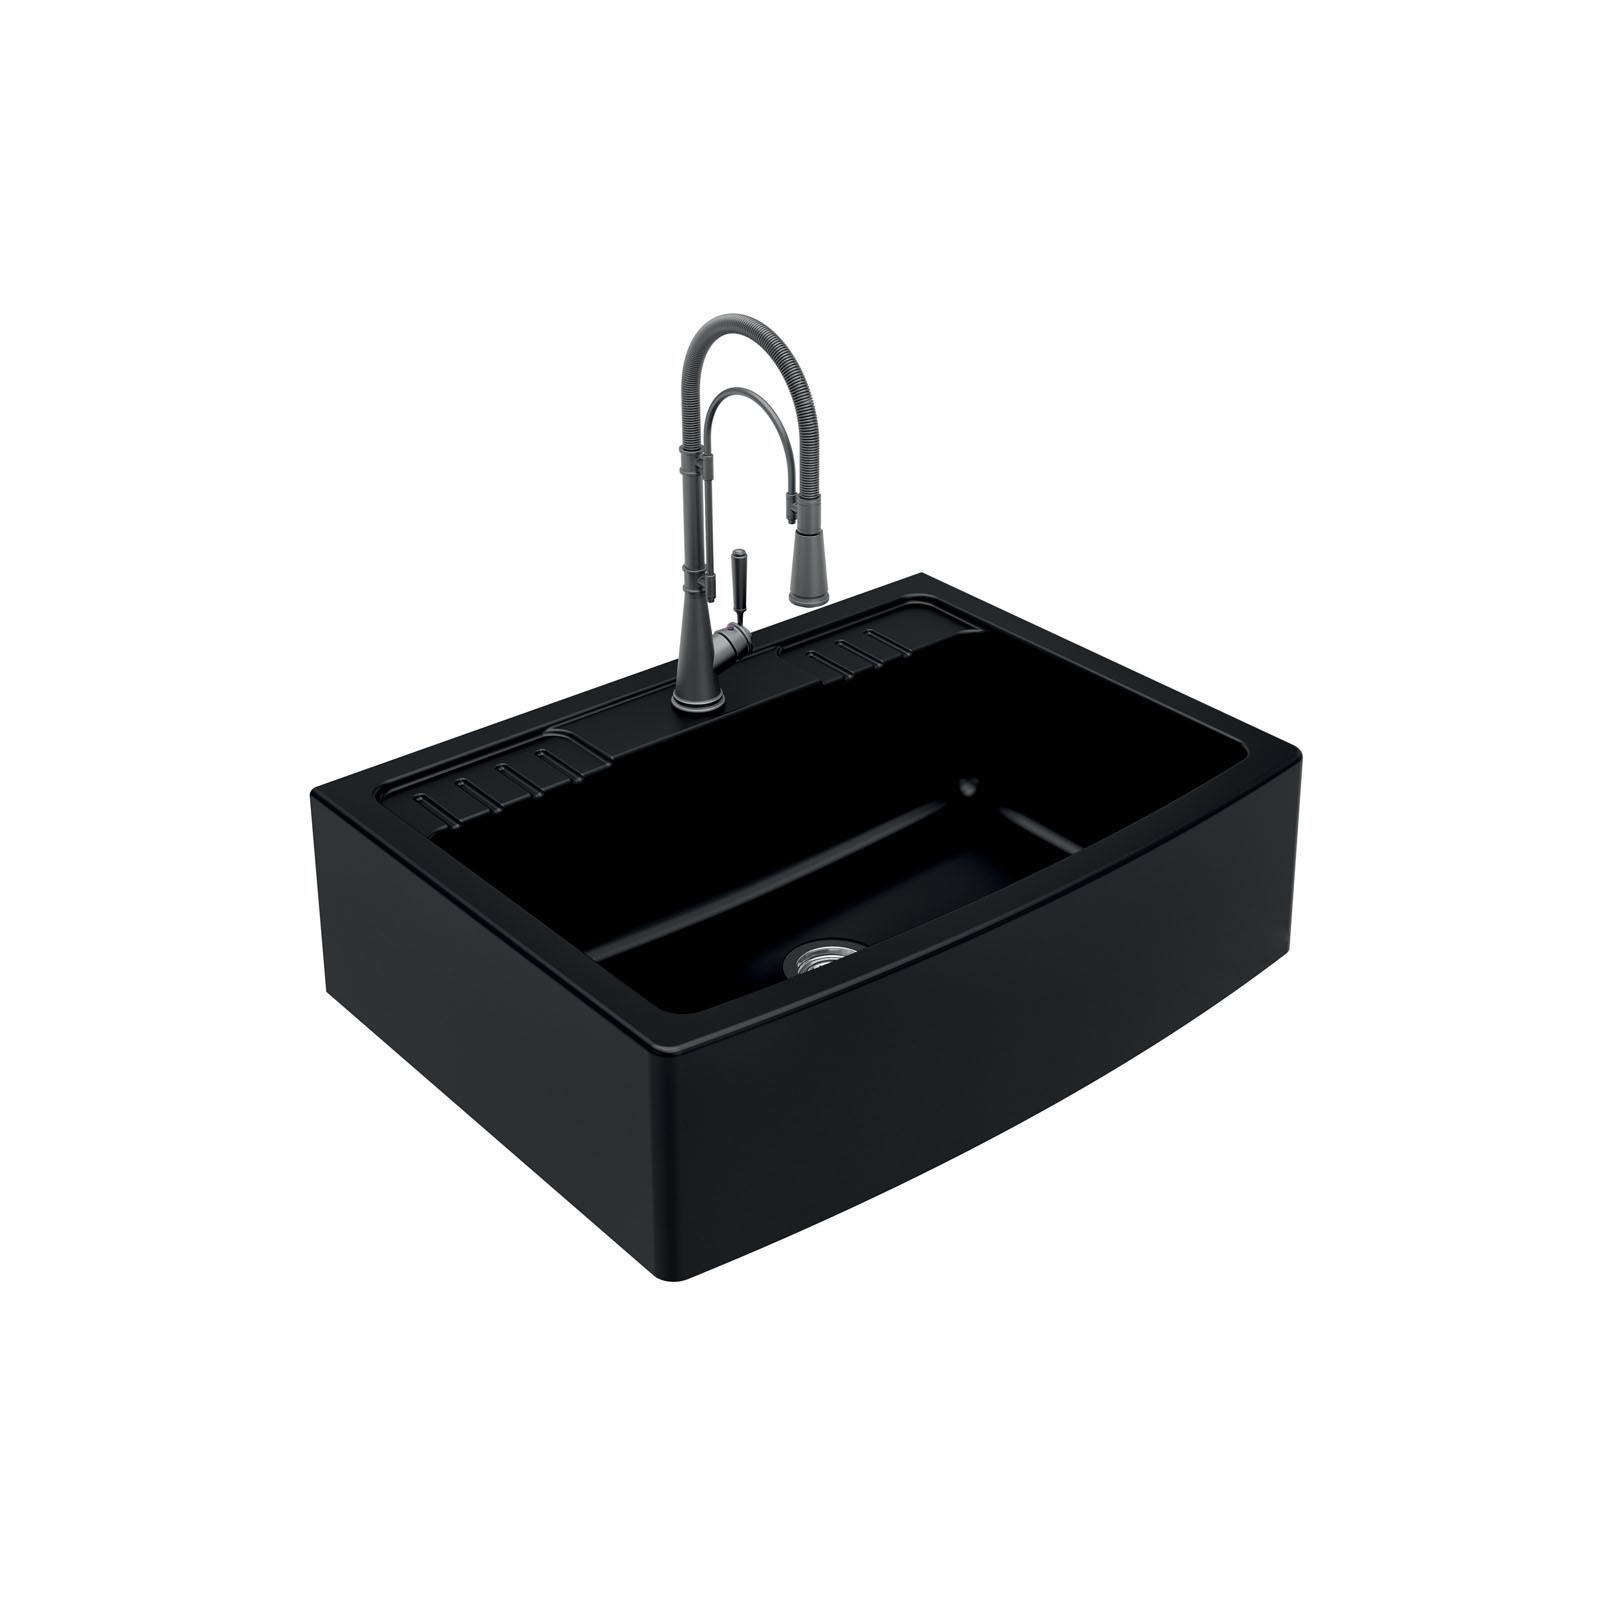 High-quality sink Clotaire IV granit black - one bowl - ambience 2